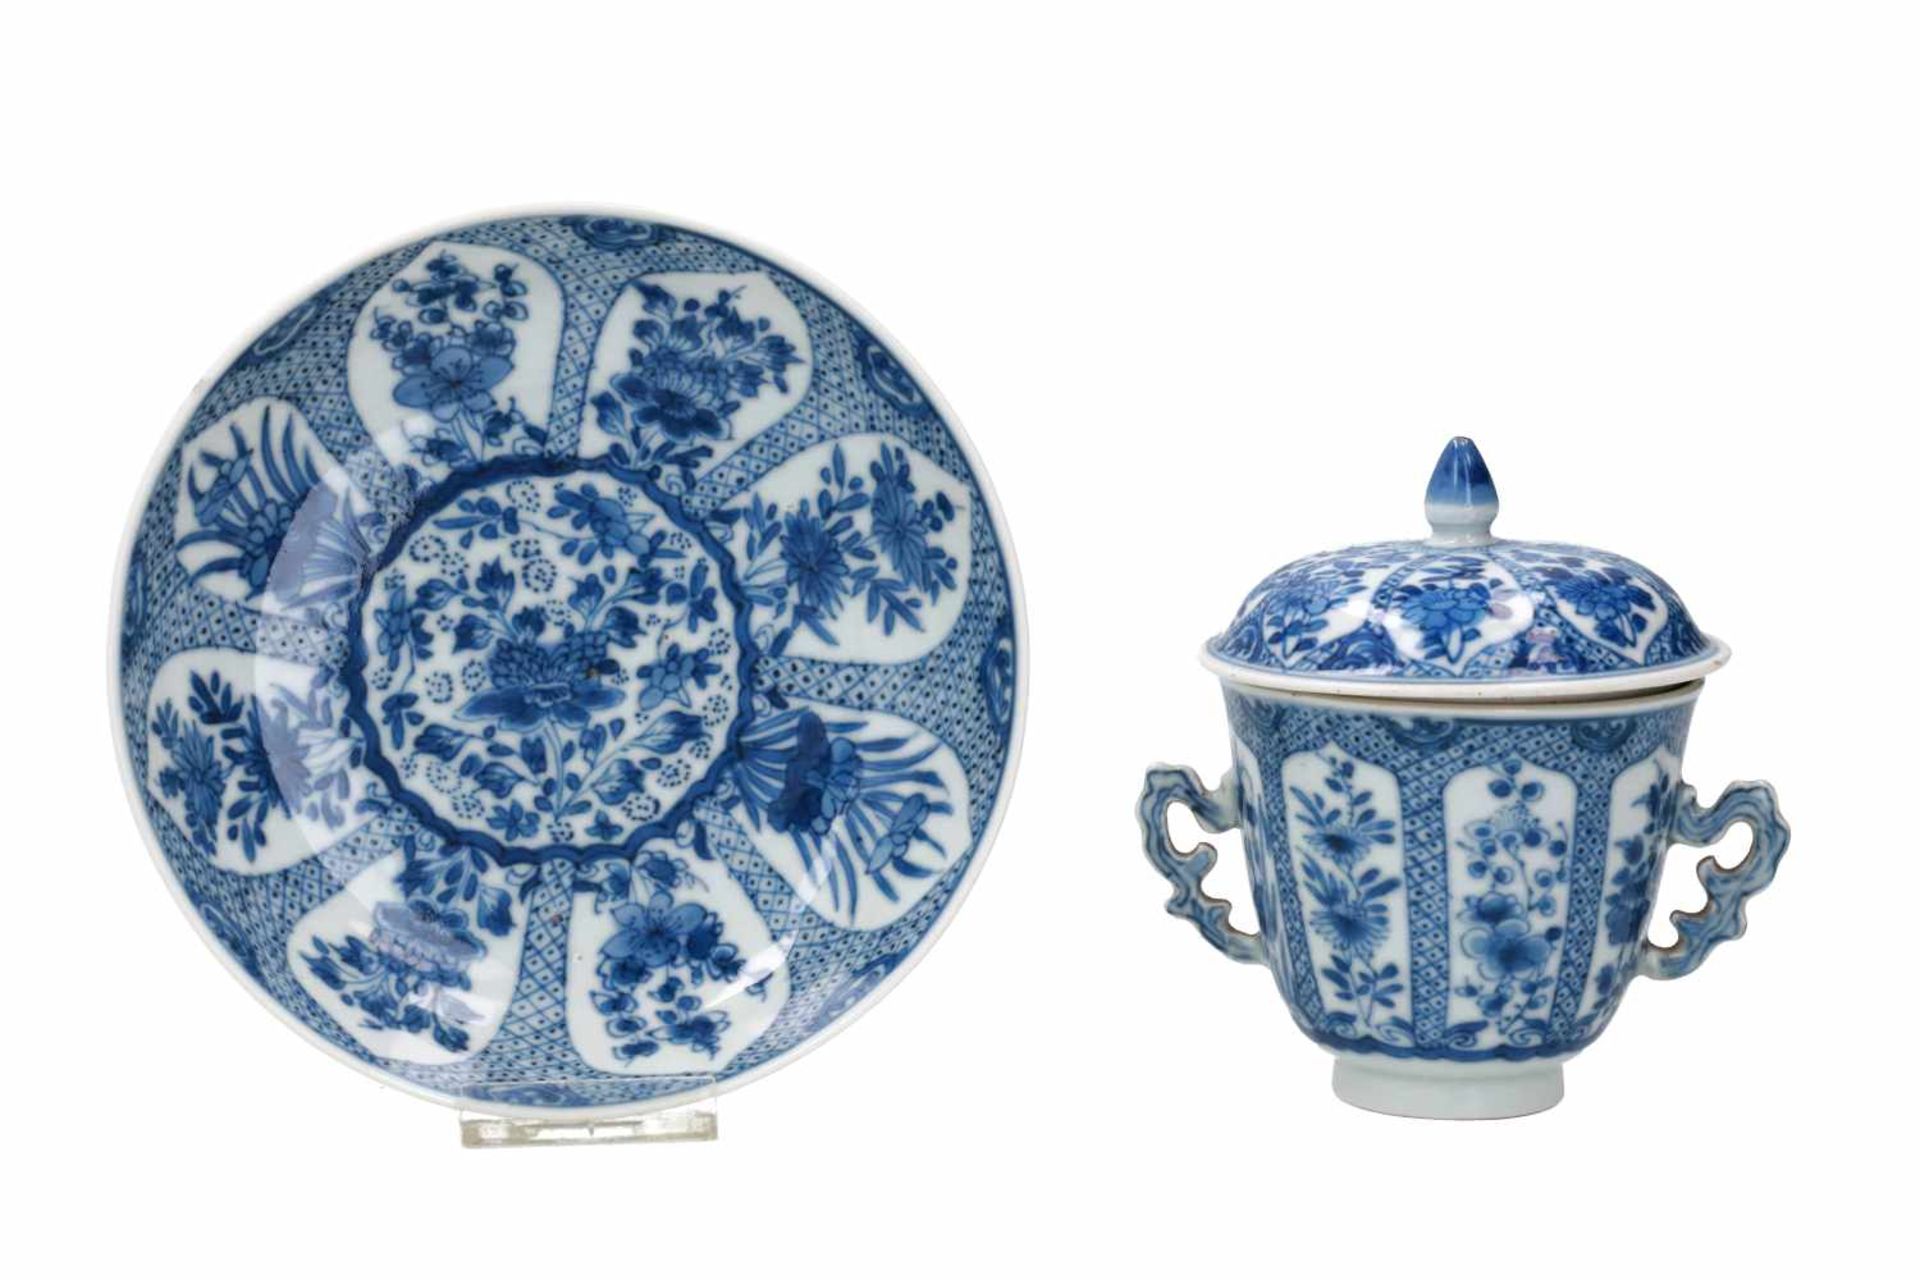 A blue and white porcelain lidded cup with two handles on a deep saucer, decorated with flowers.